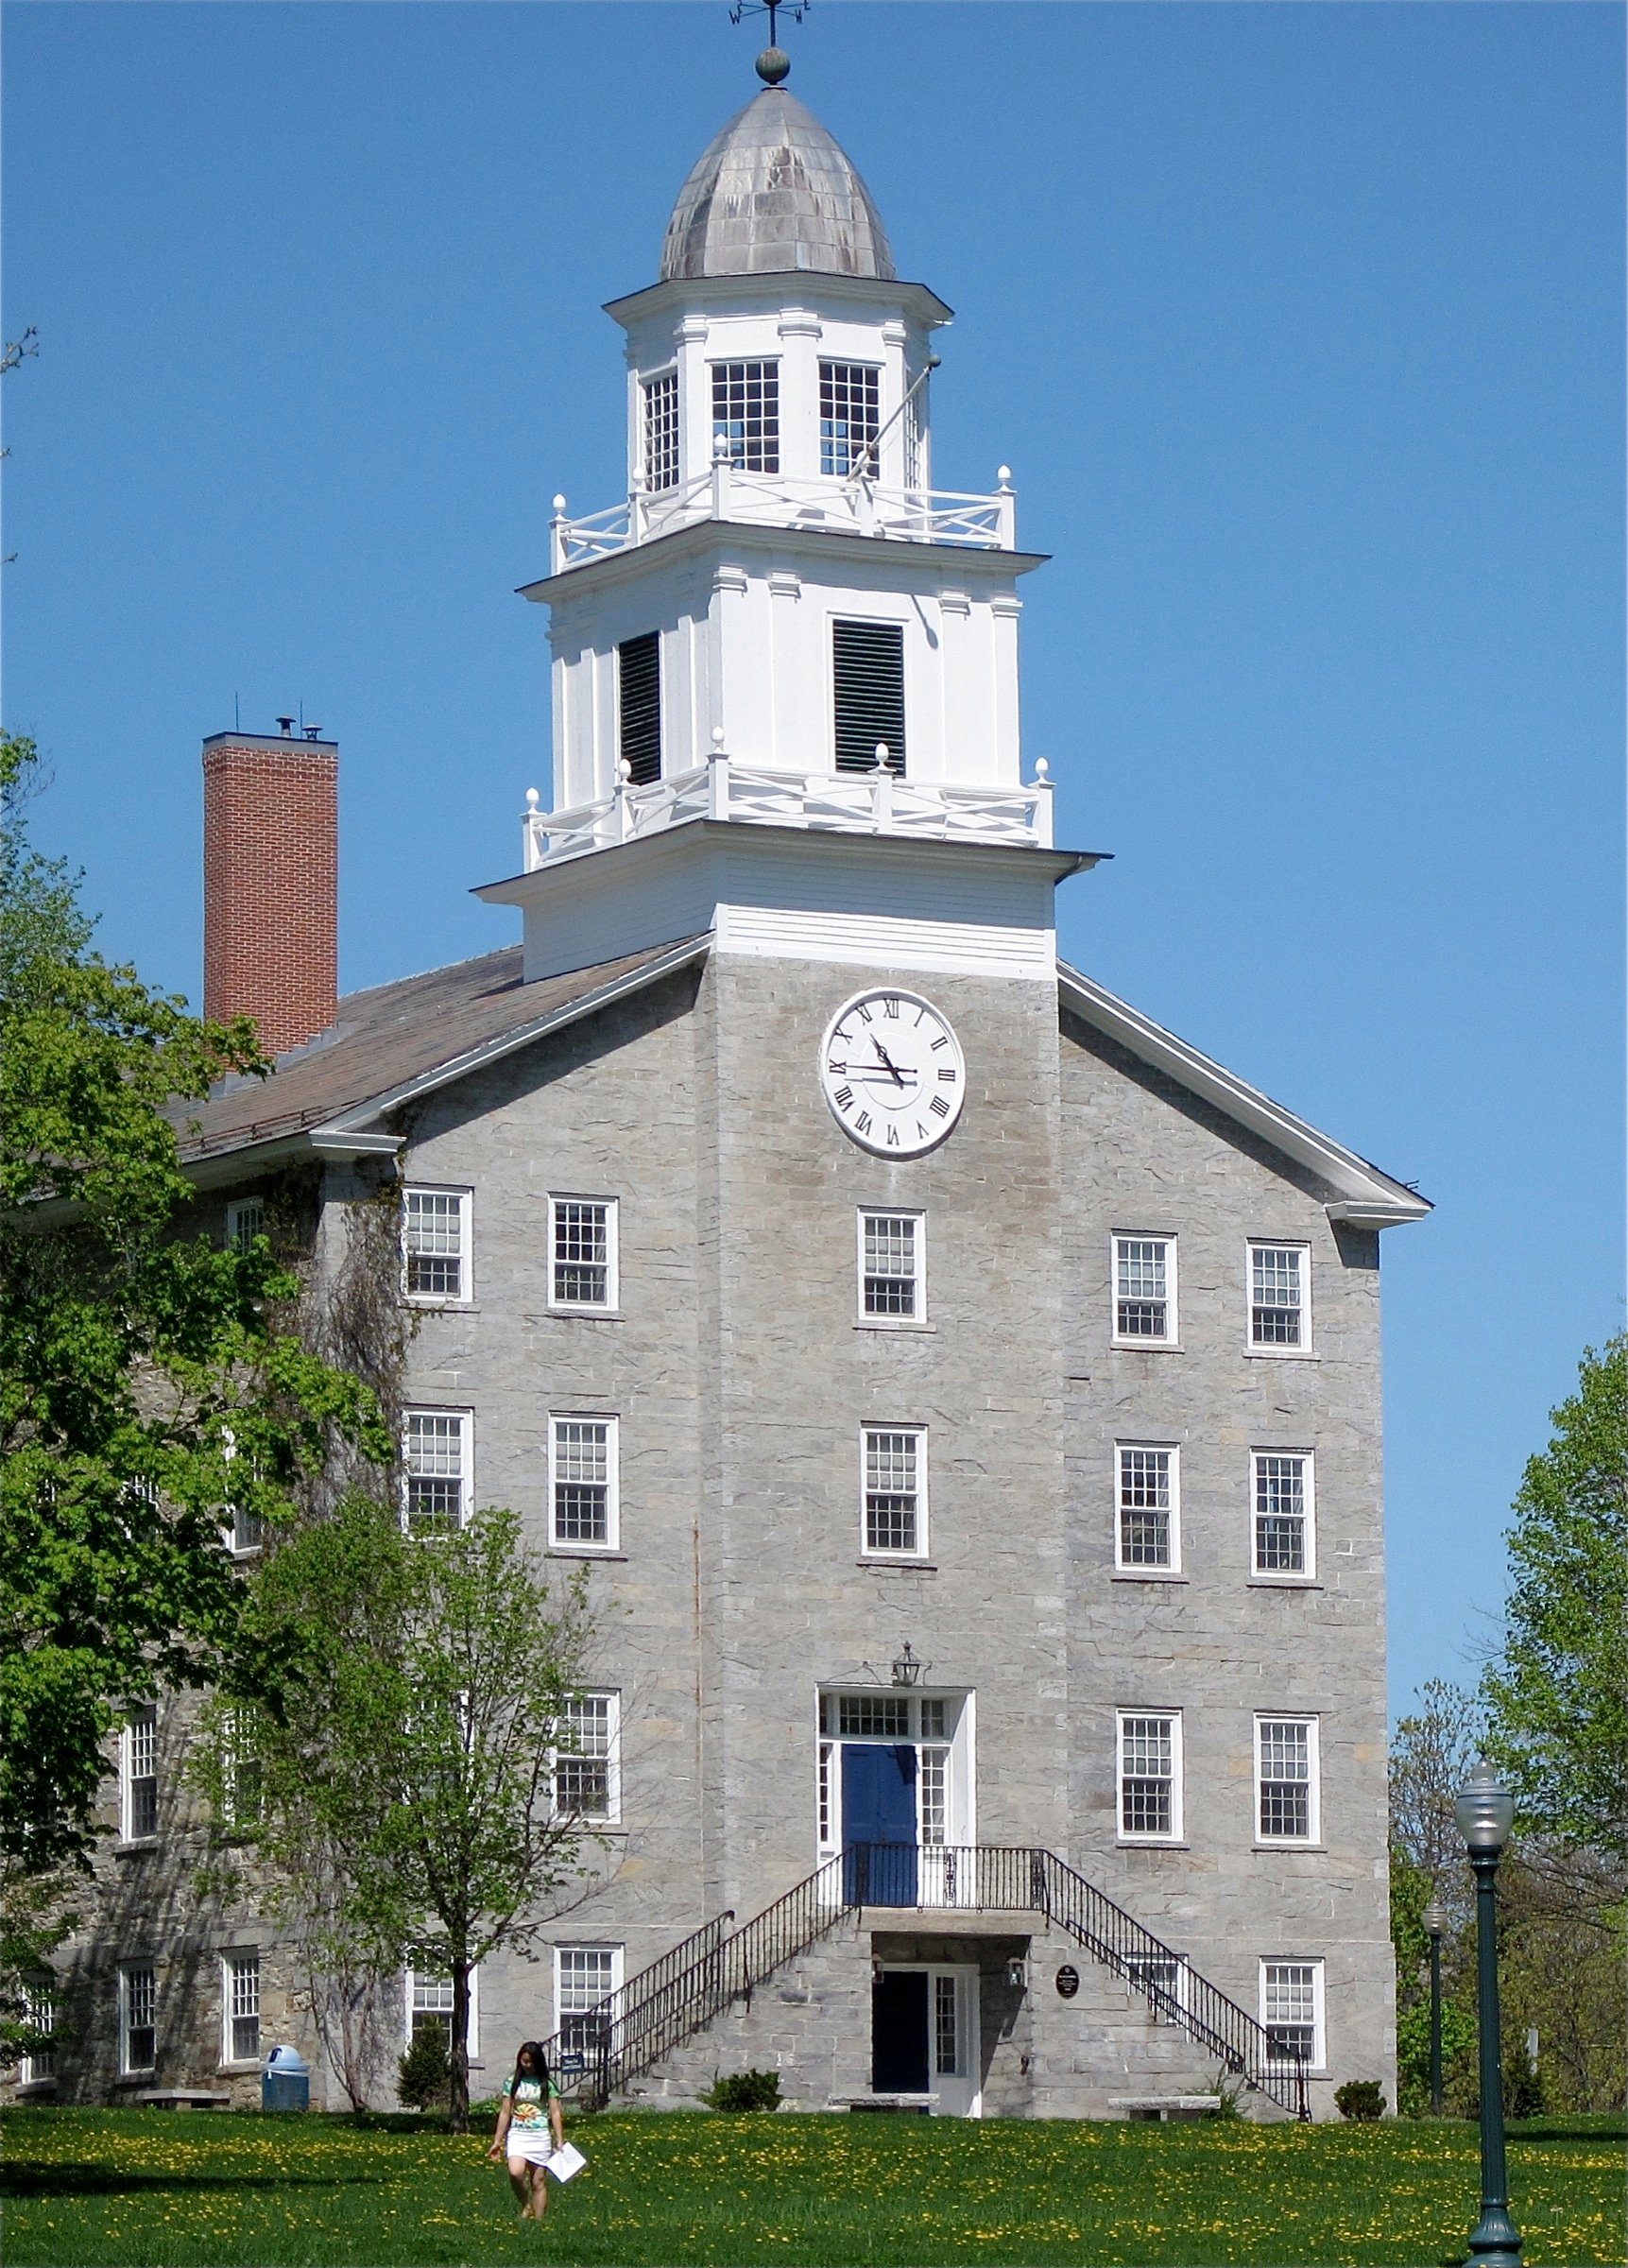 Middlebury College completed the Old Chapel, now an administration building, in 1836. Photo by Alan Levine/CC BY (https://creativecommons.org/licenses/by/2.0)